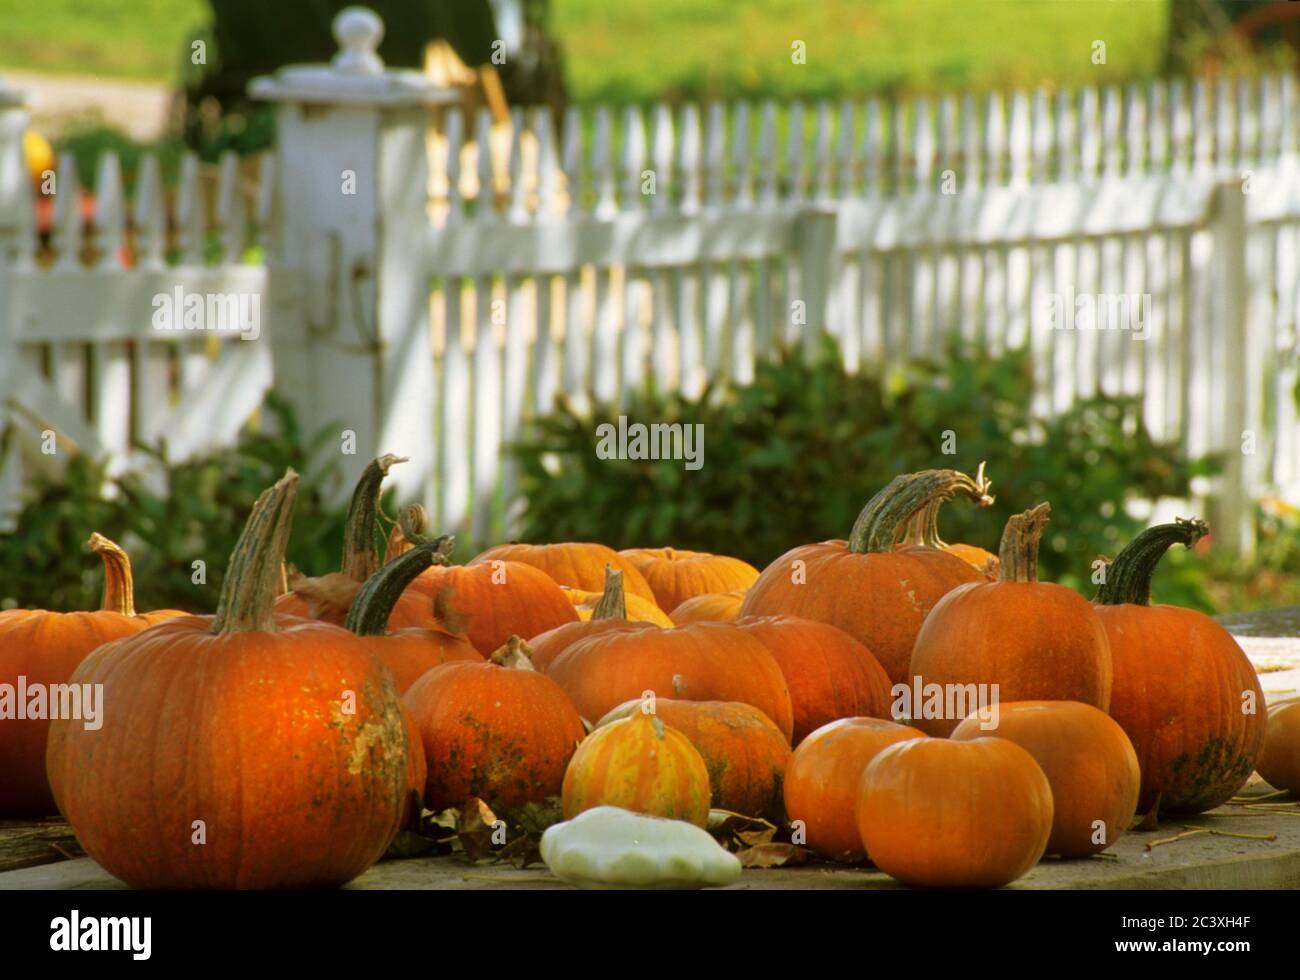 Assorted pumpkins on table with white picket fence. Stock Photo